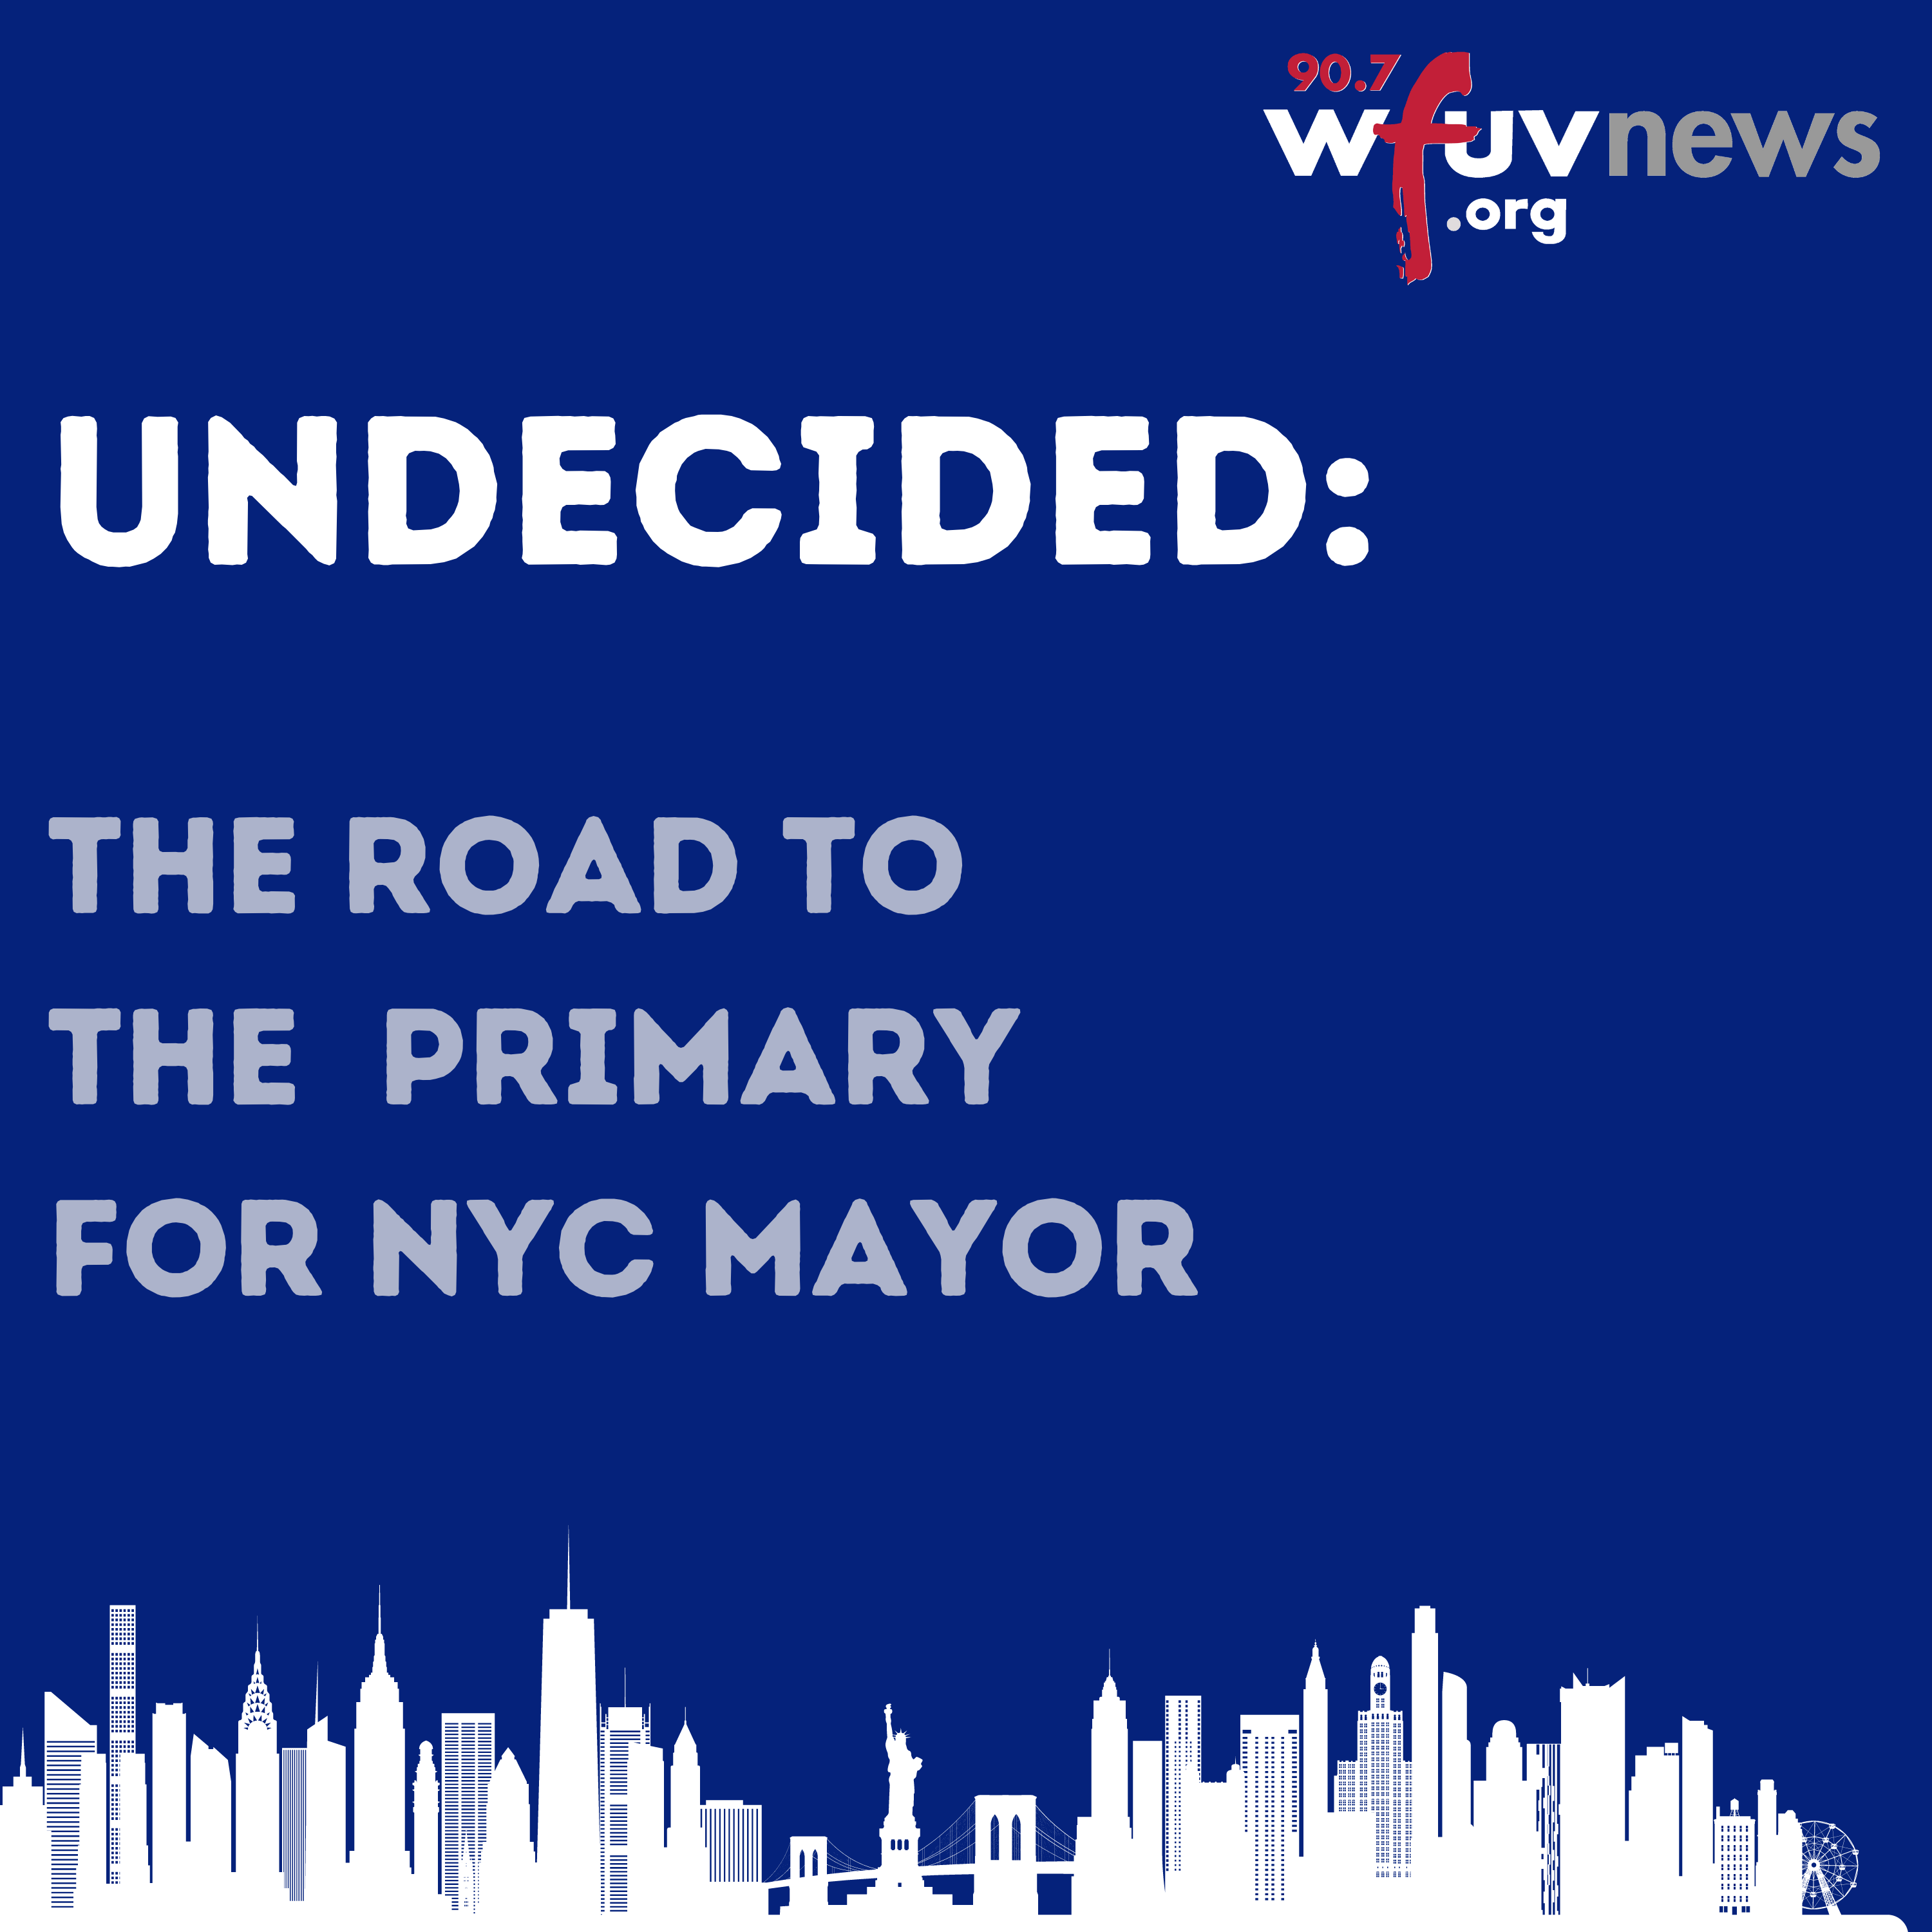 Primary Eve: Voters Head to the Polls for NYC Primaries